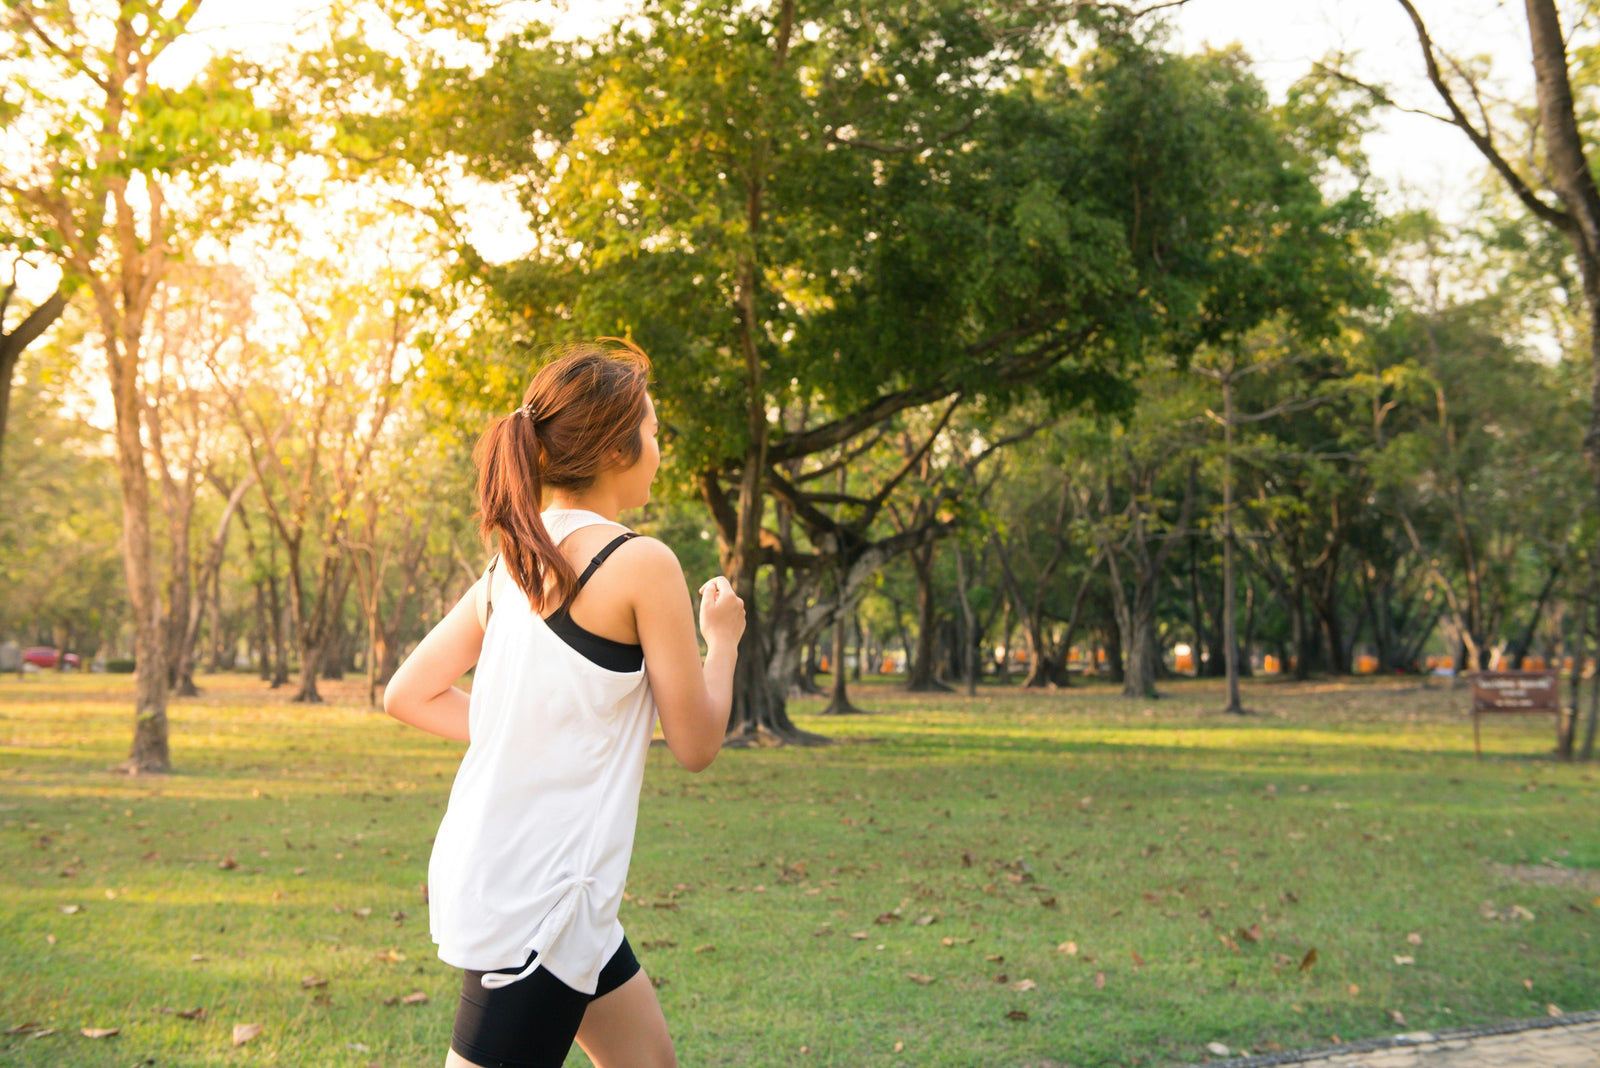 5 Amazing Benefits of Going for a Run (and How to Get Started)